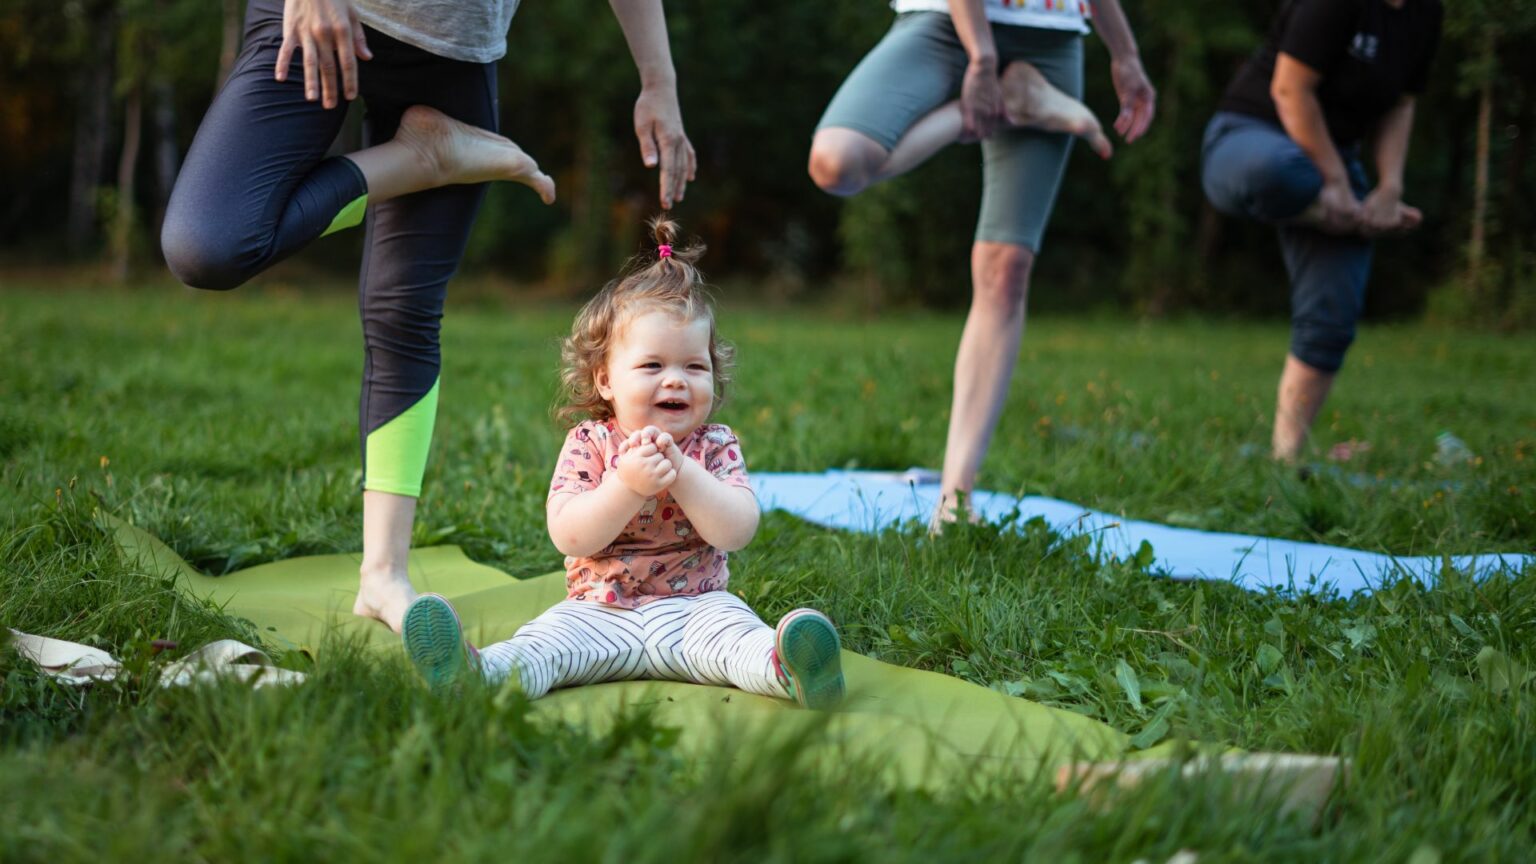 What Are the Benefits of Yoga for Children